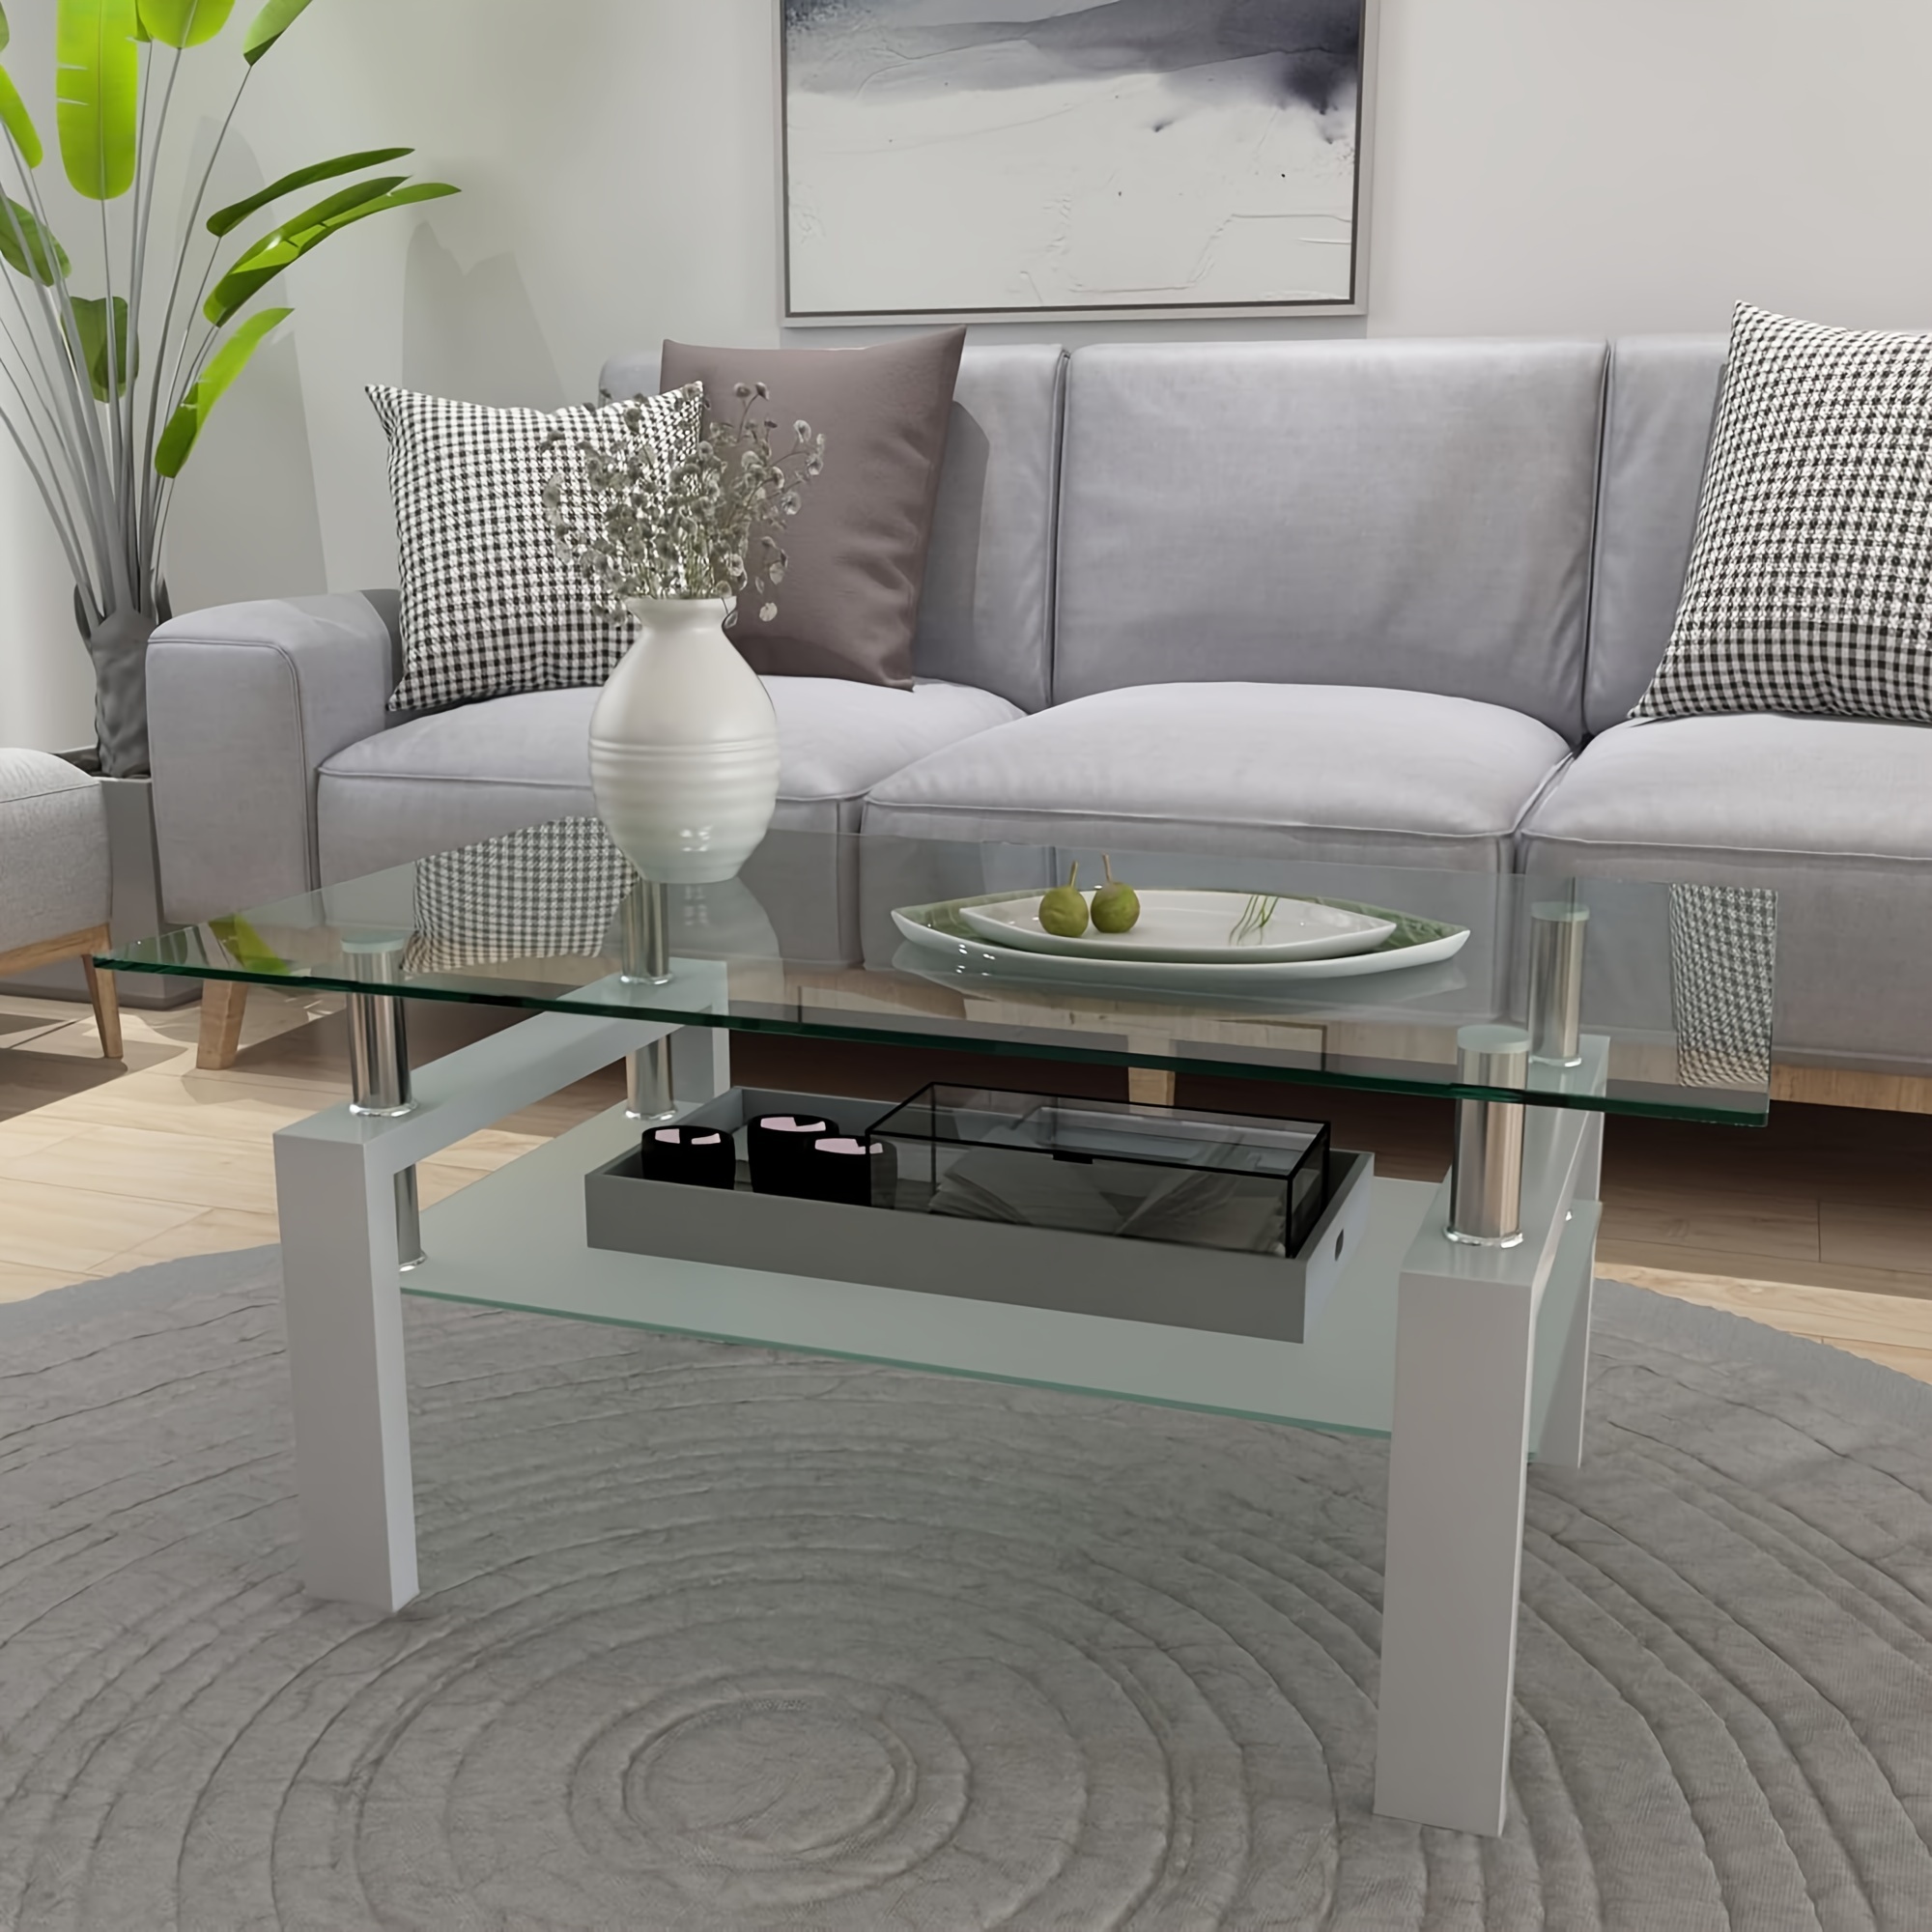 

Coffee Table With Metal Tube Legs, Glass And Rectangle End Table For Livingroom (white)